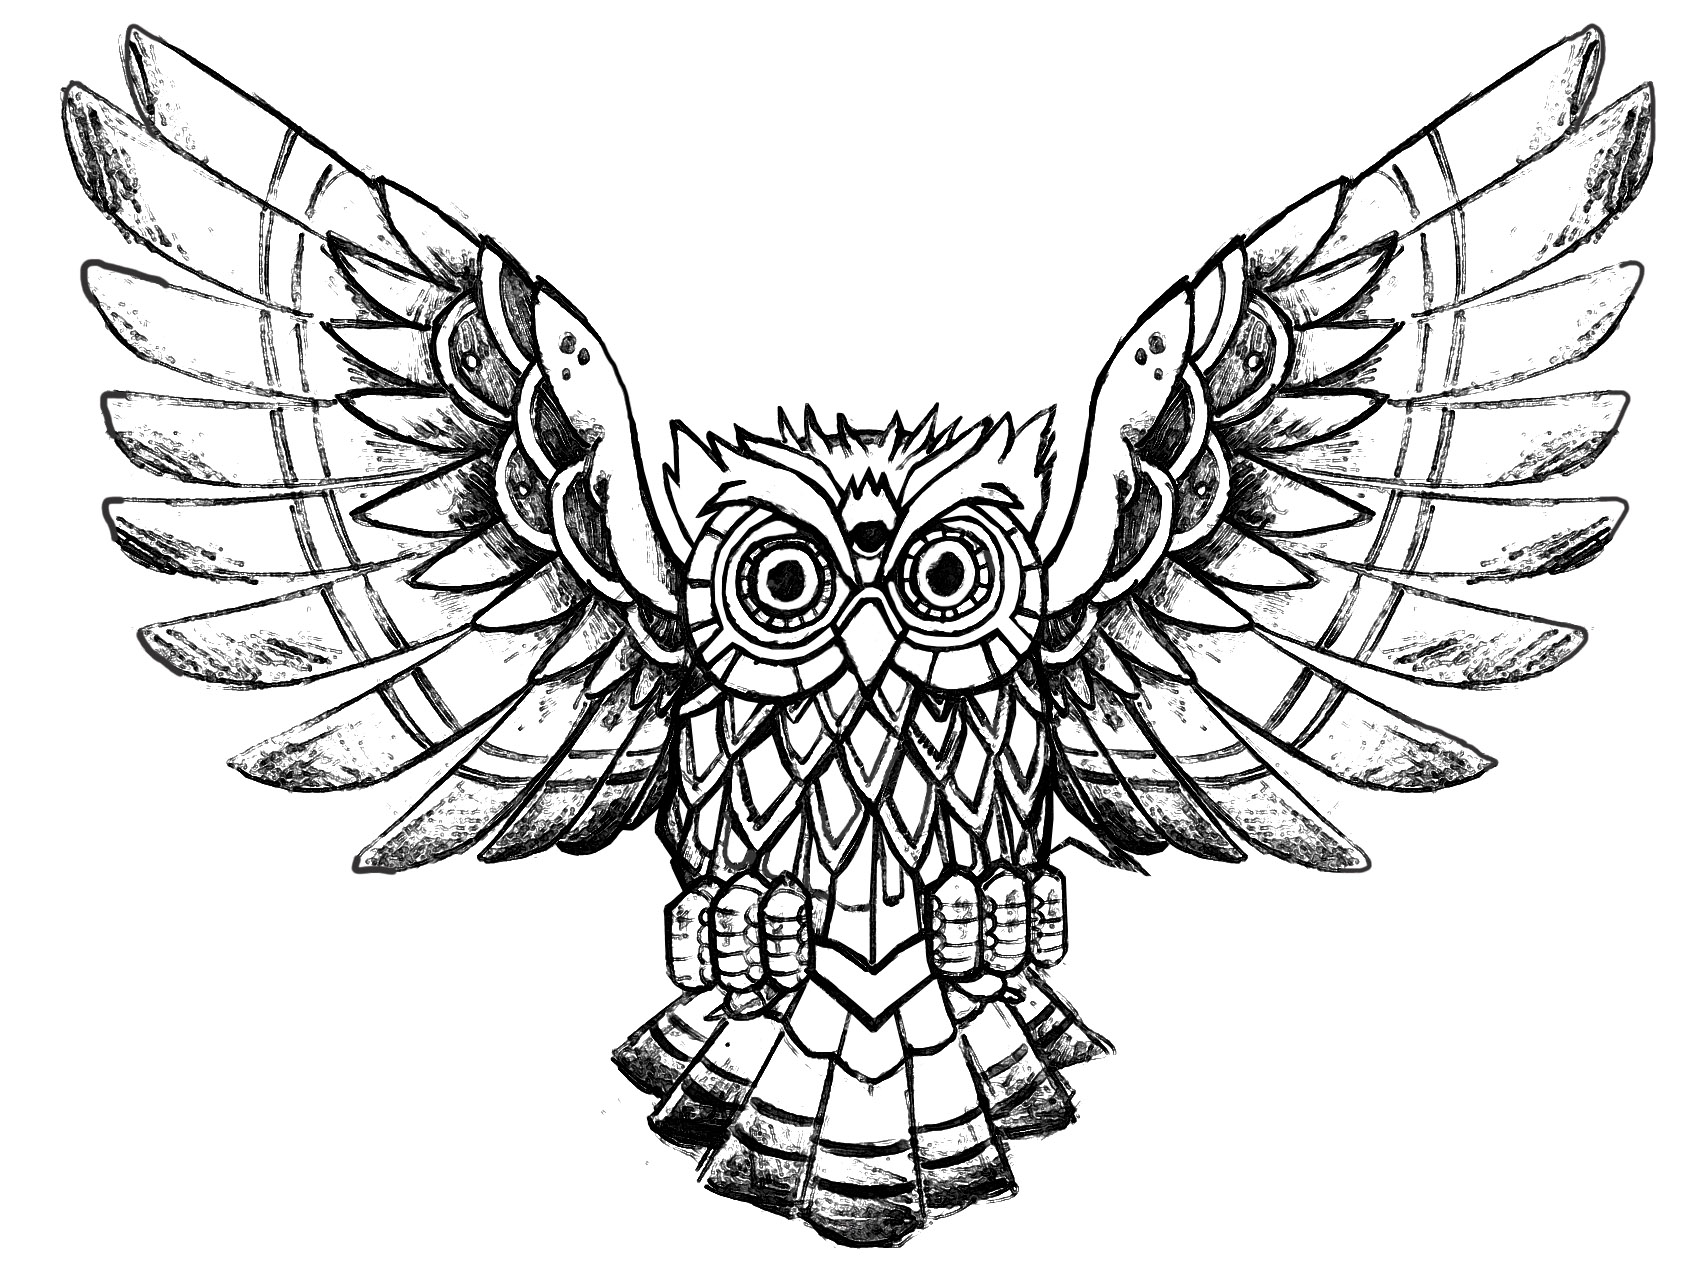 Owl raw drawing - Owls Adult Coloring Pages